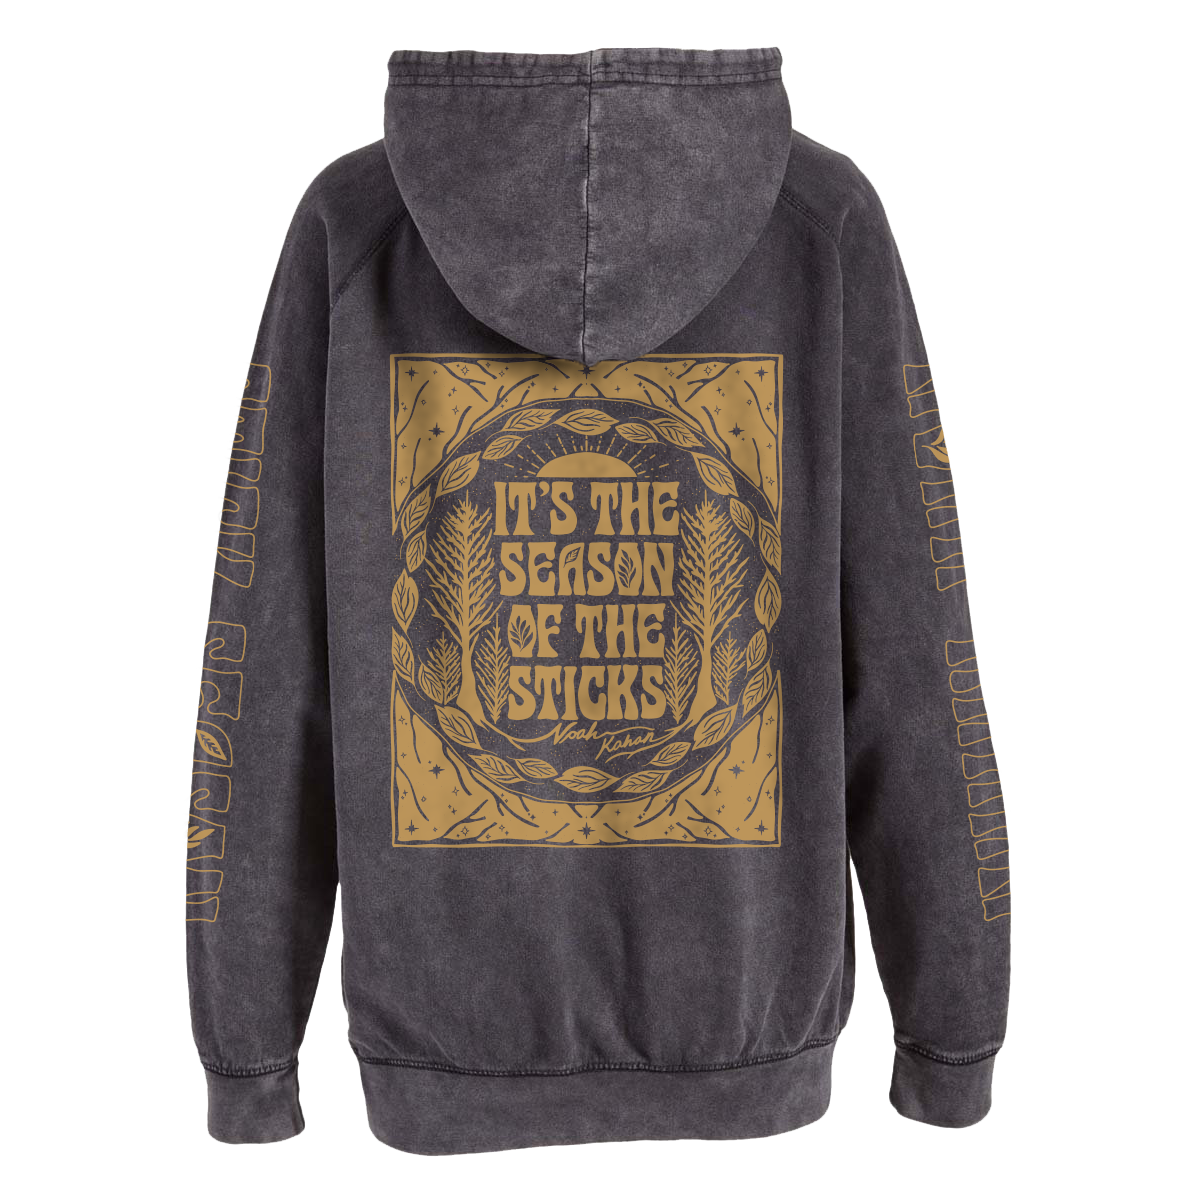 The official Noah Kahan Stick Season Hoodie in vintage black mineral wash. "It's the season of the sticks" on the back, and full length prints on each sleeve, all in gold metallic ink.